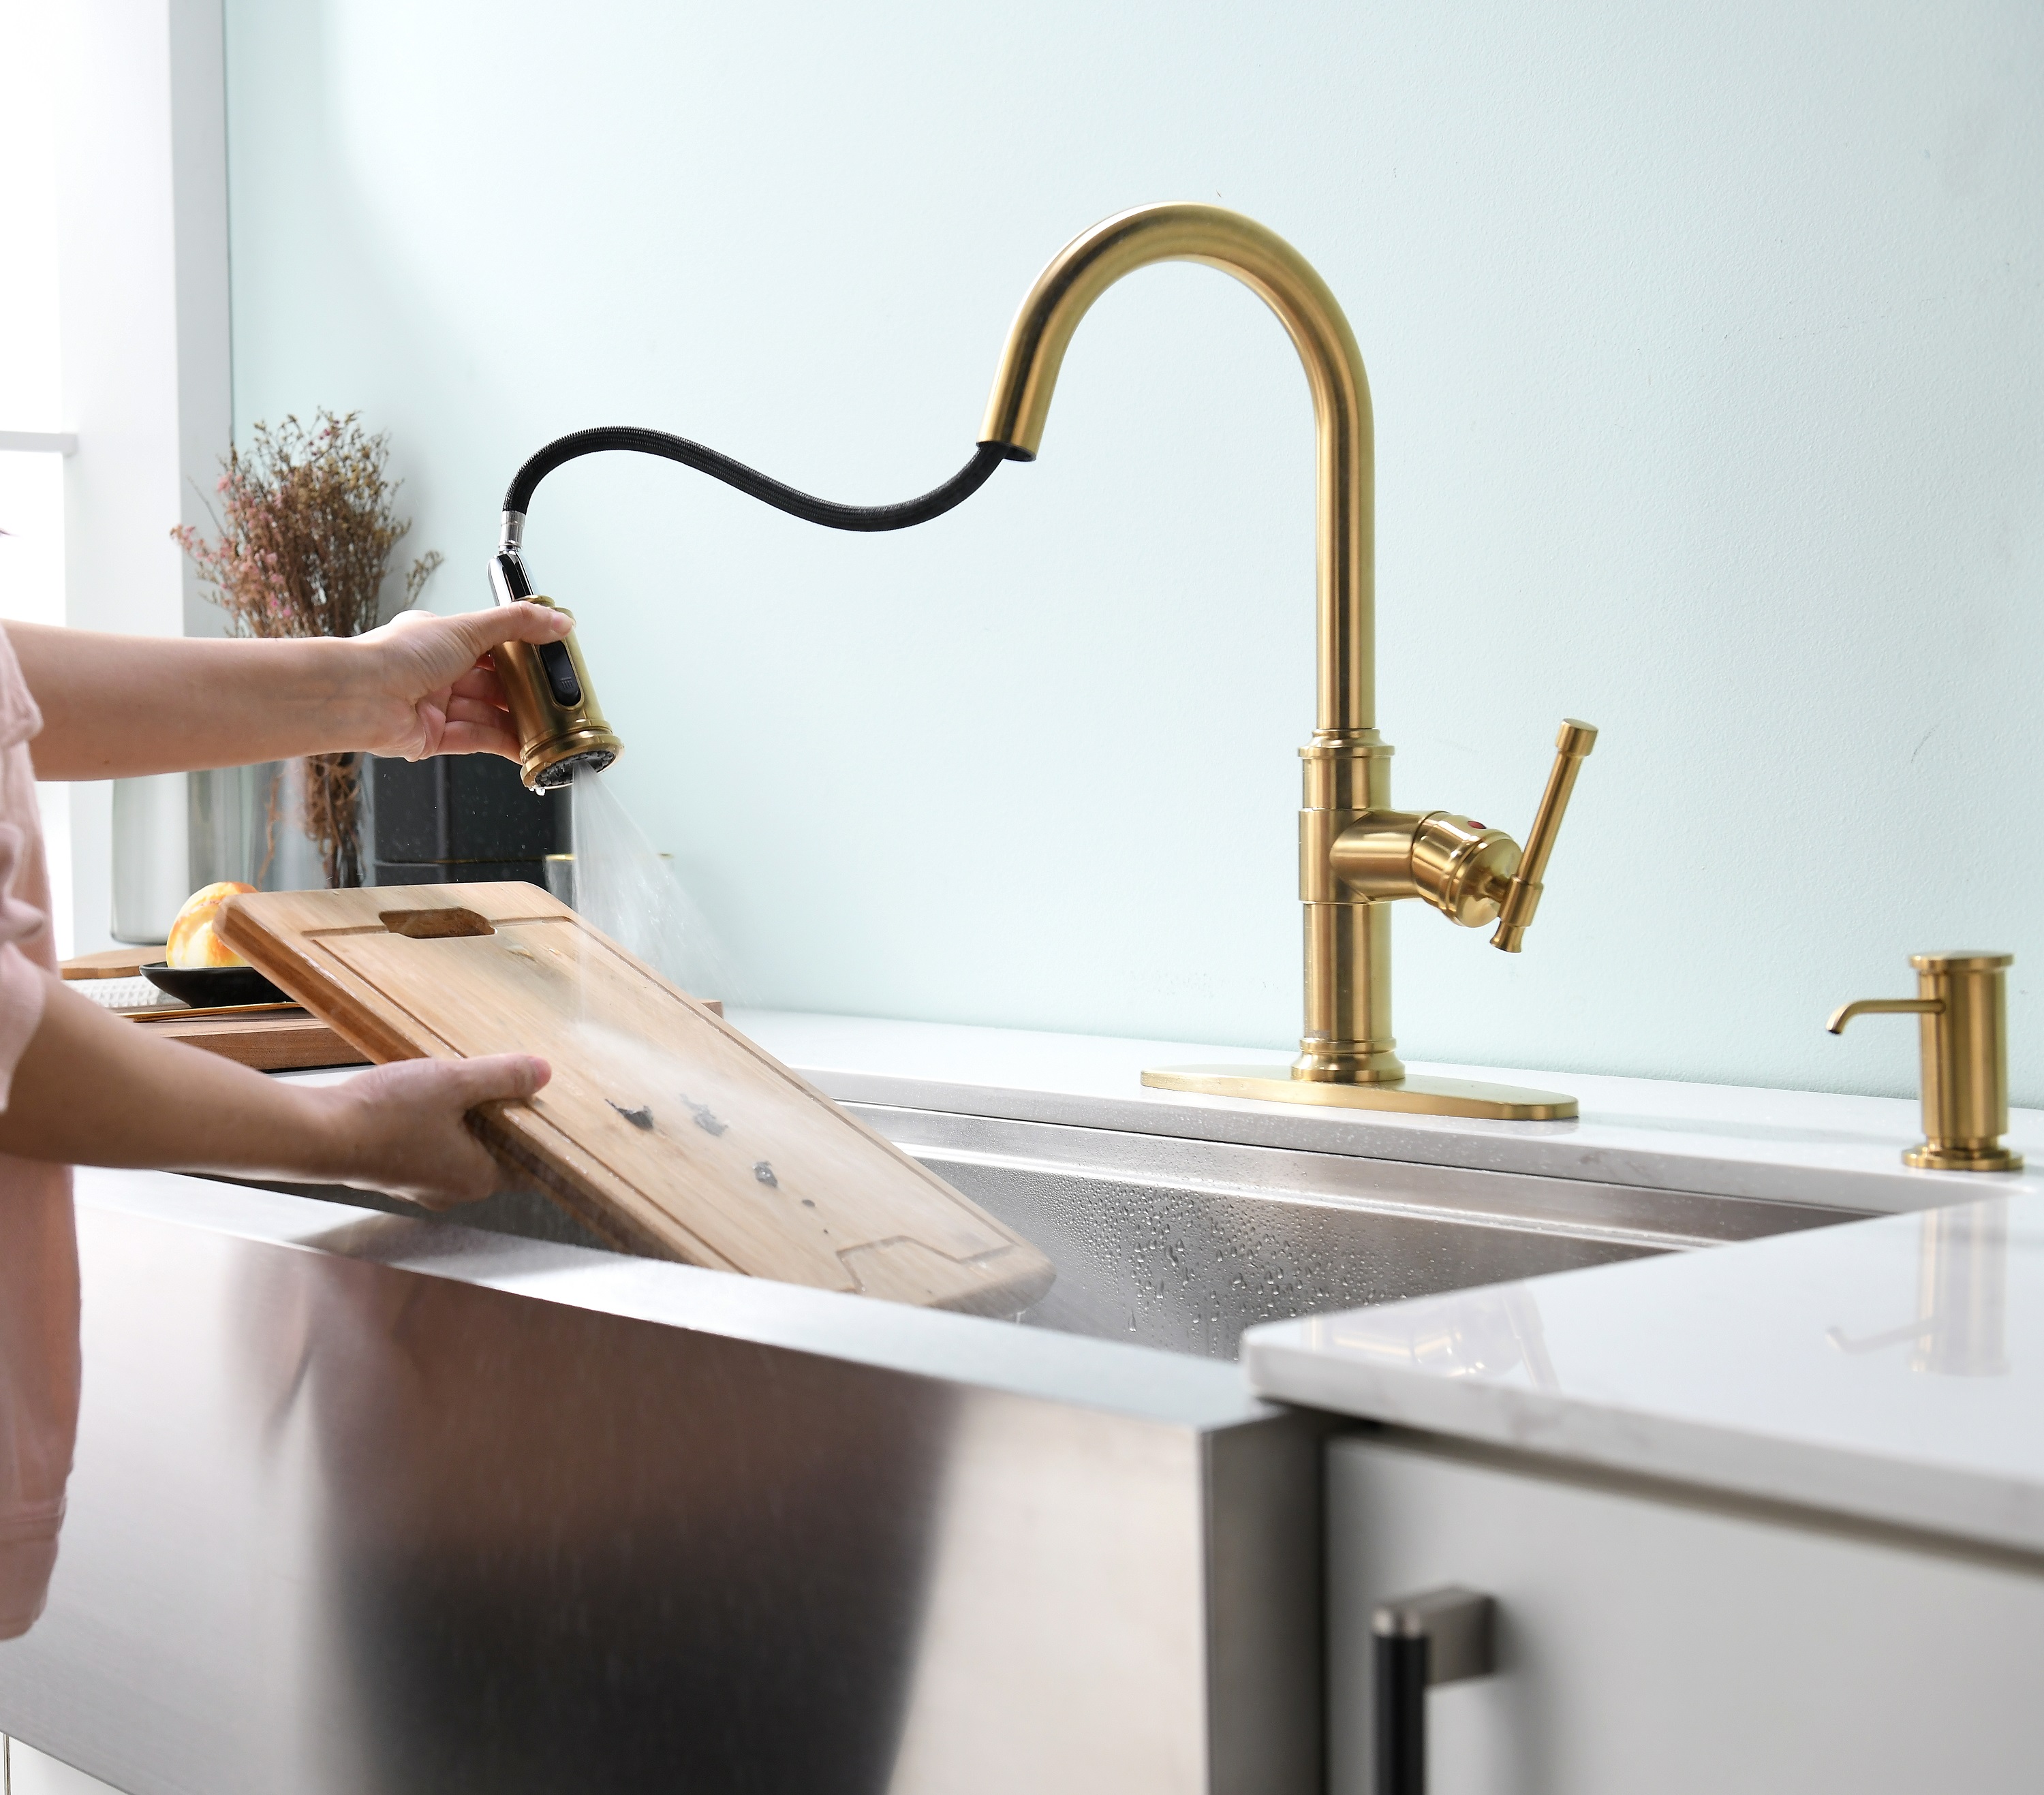 Brushed Gold Antique Pull-Down Kitchen Faucet with Soap Dispenser